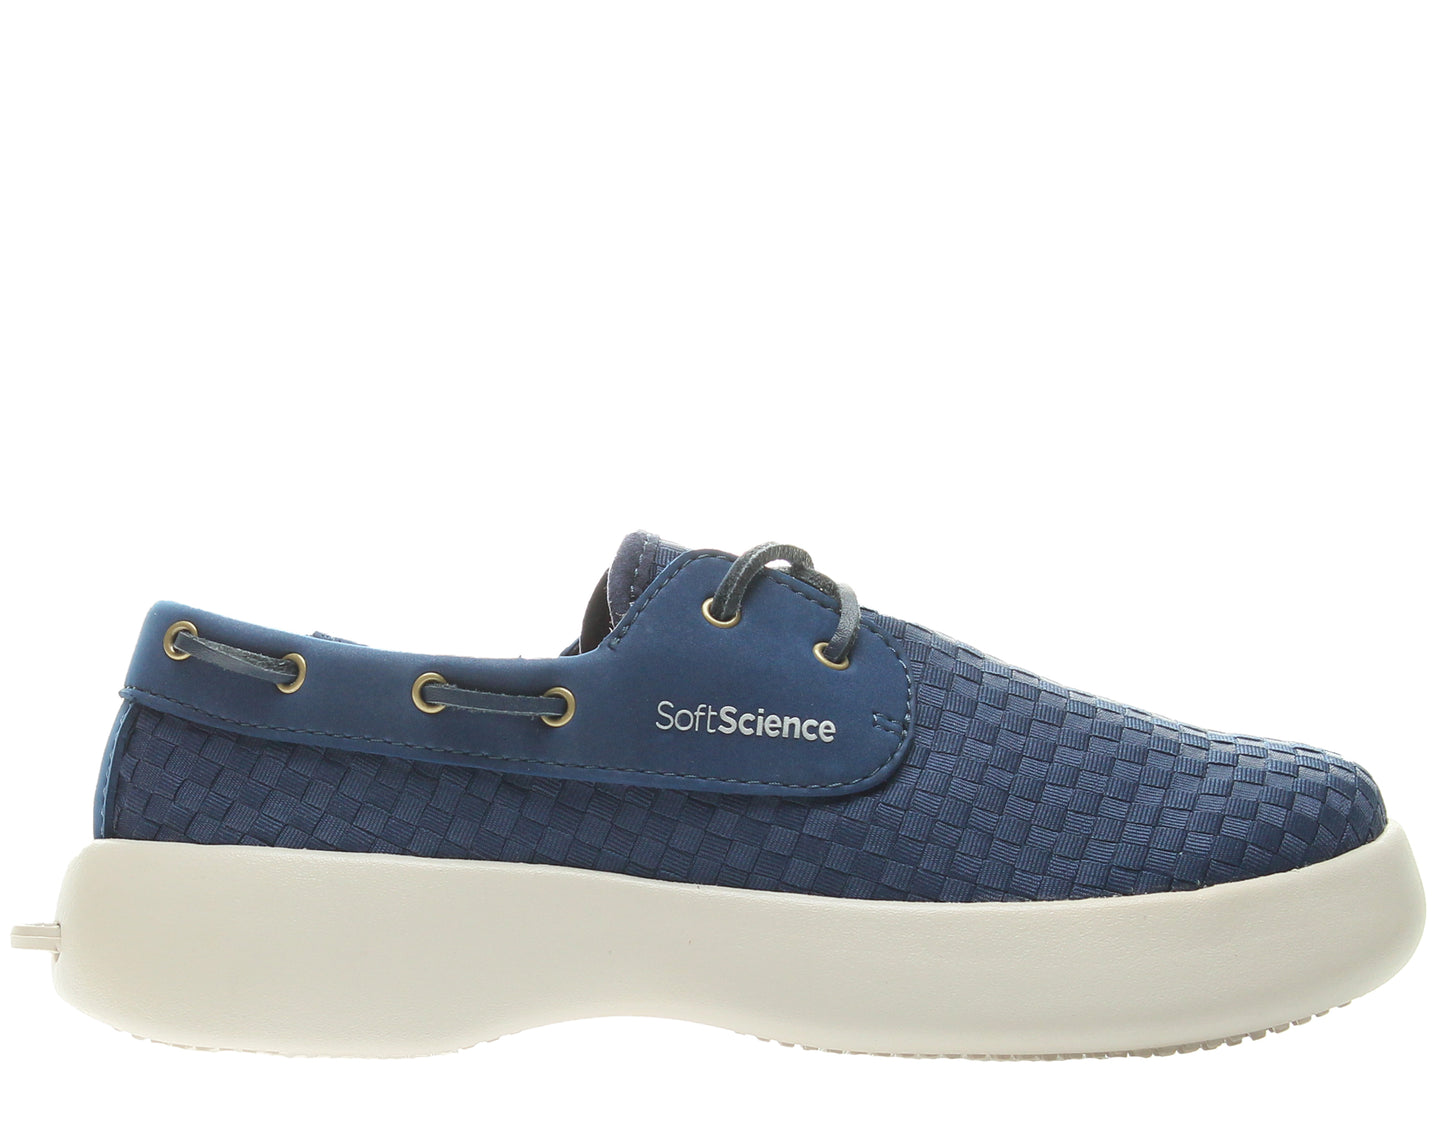 SoftScience Cruise Women's Lace Up Boat Shoes